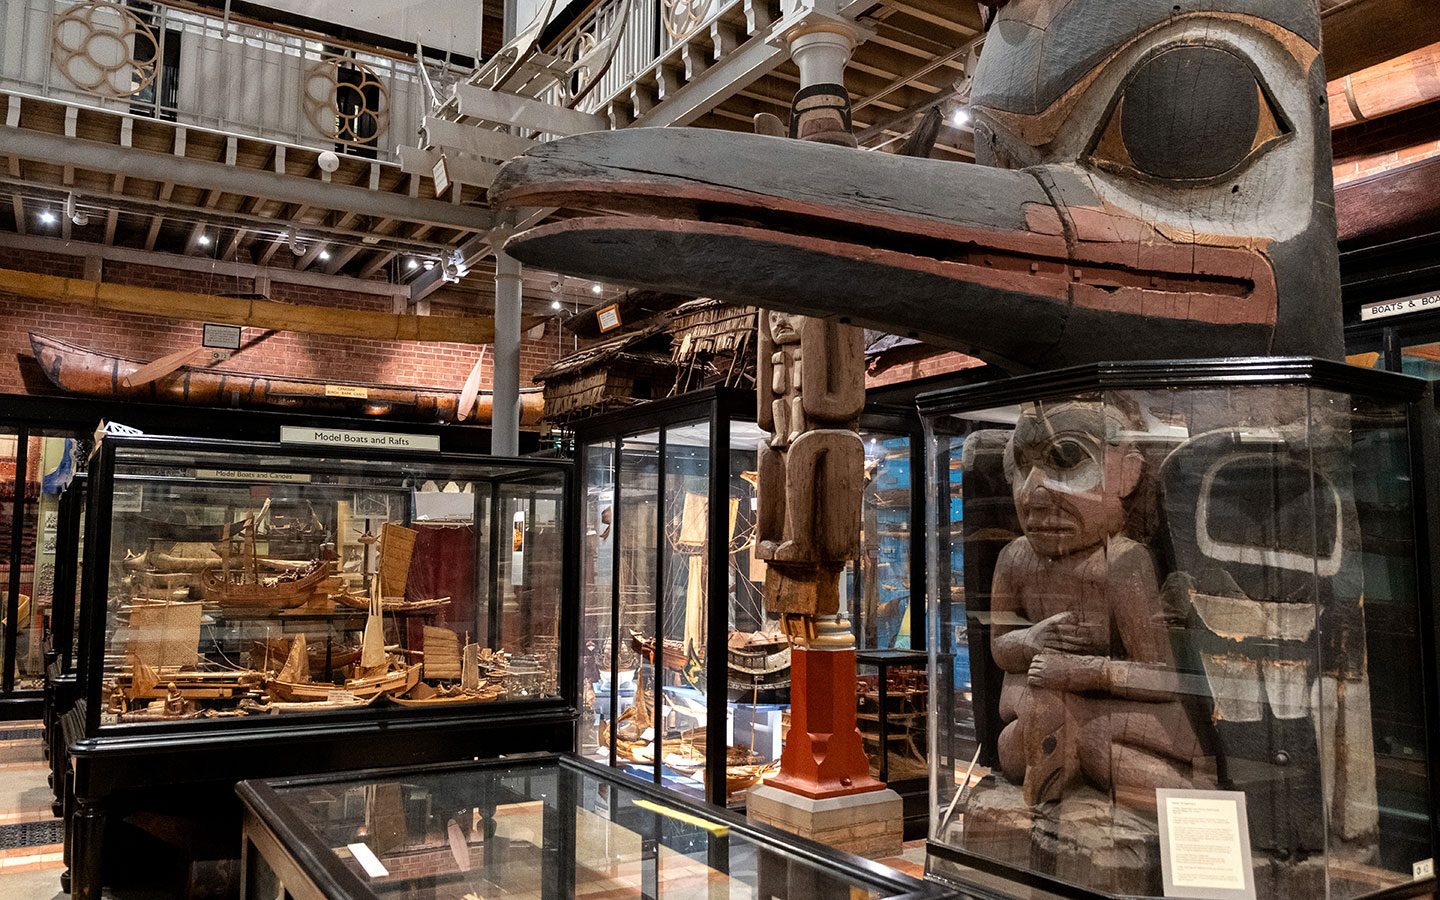 The Pitt Rivers Museum of anthropology and archaeology in Oxford